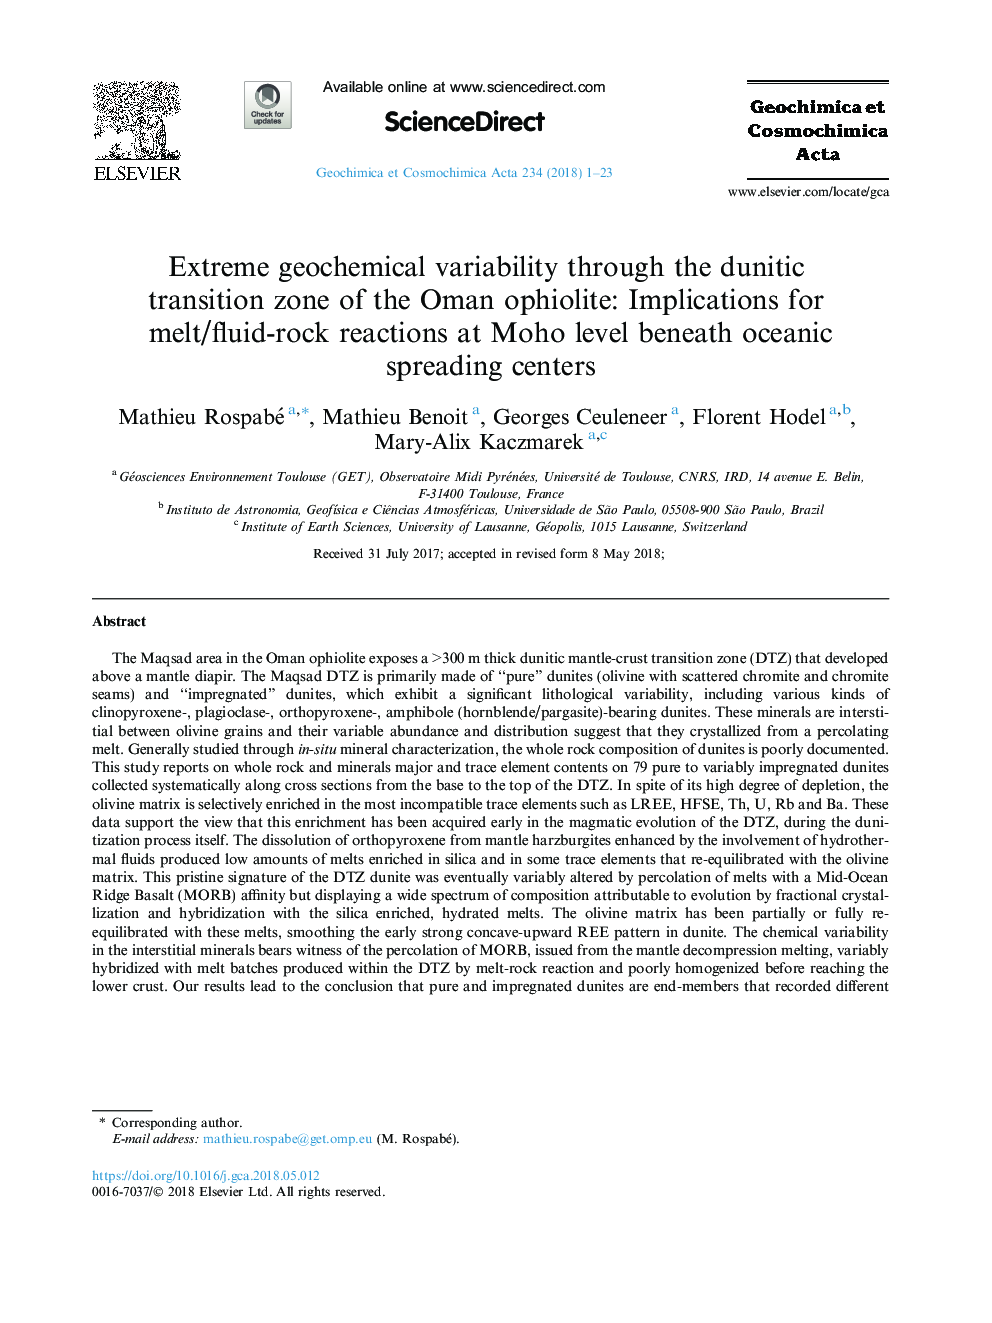 Extreme geochemical variability through the dunitic transition zone of the Oman ophiolite: Implications for melt/fluid-rock reactions at Moho level beneath oceanic spreading centers